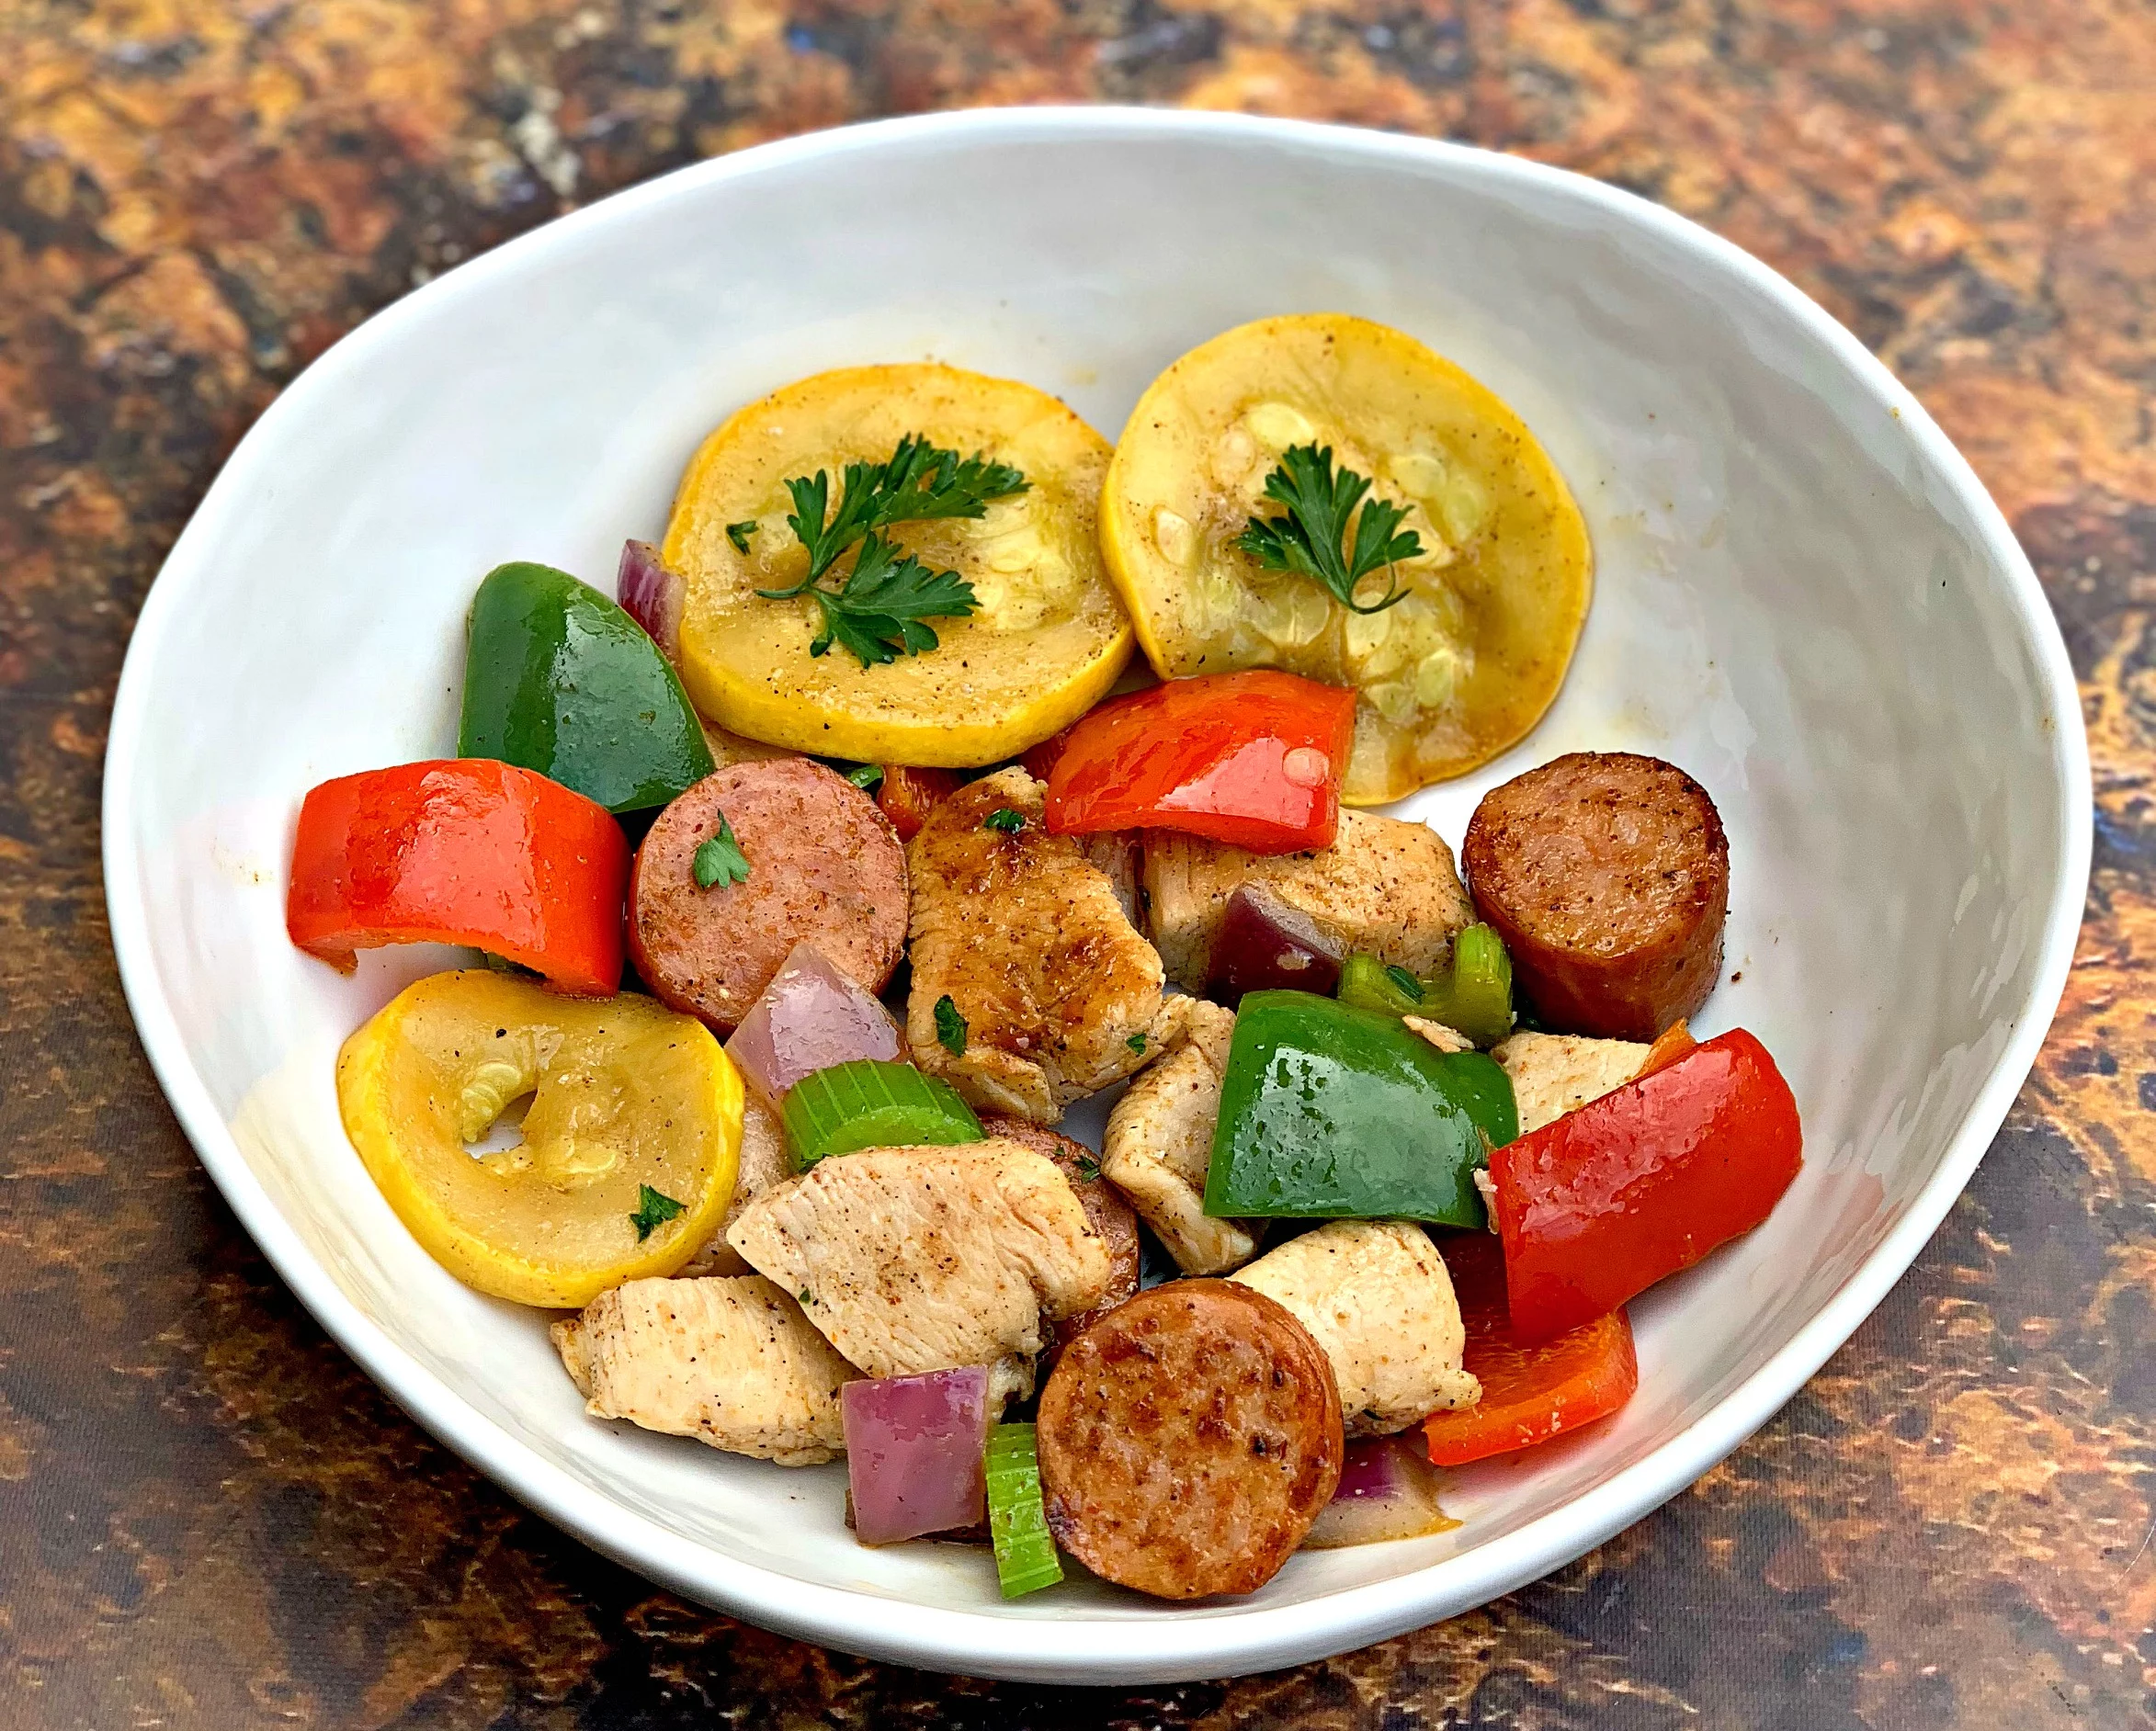 Spicy Cajun Sausage and Chicken Skillet Recipe - The Forked Spoon